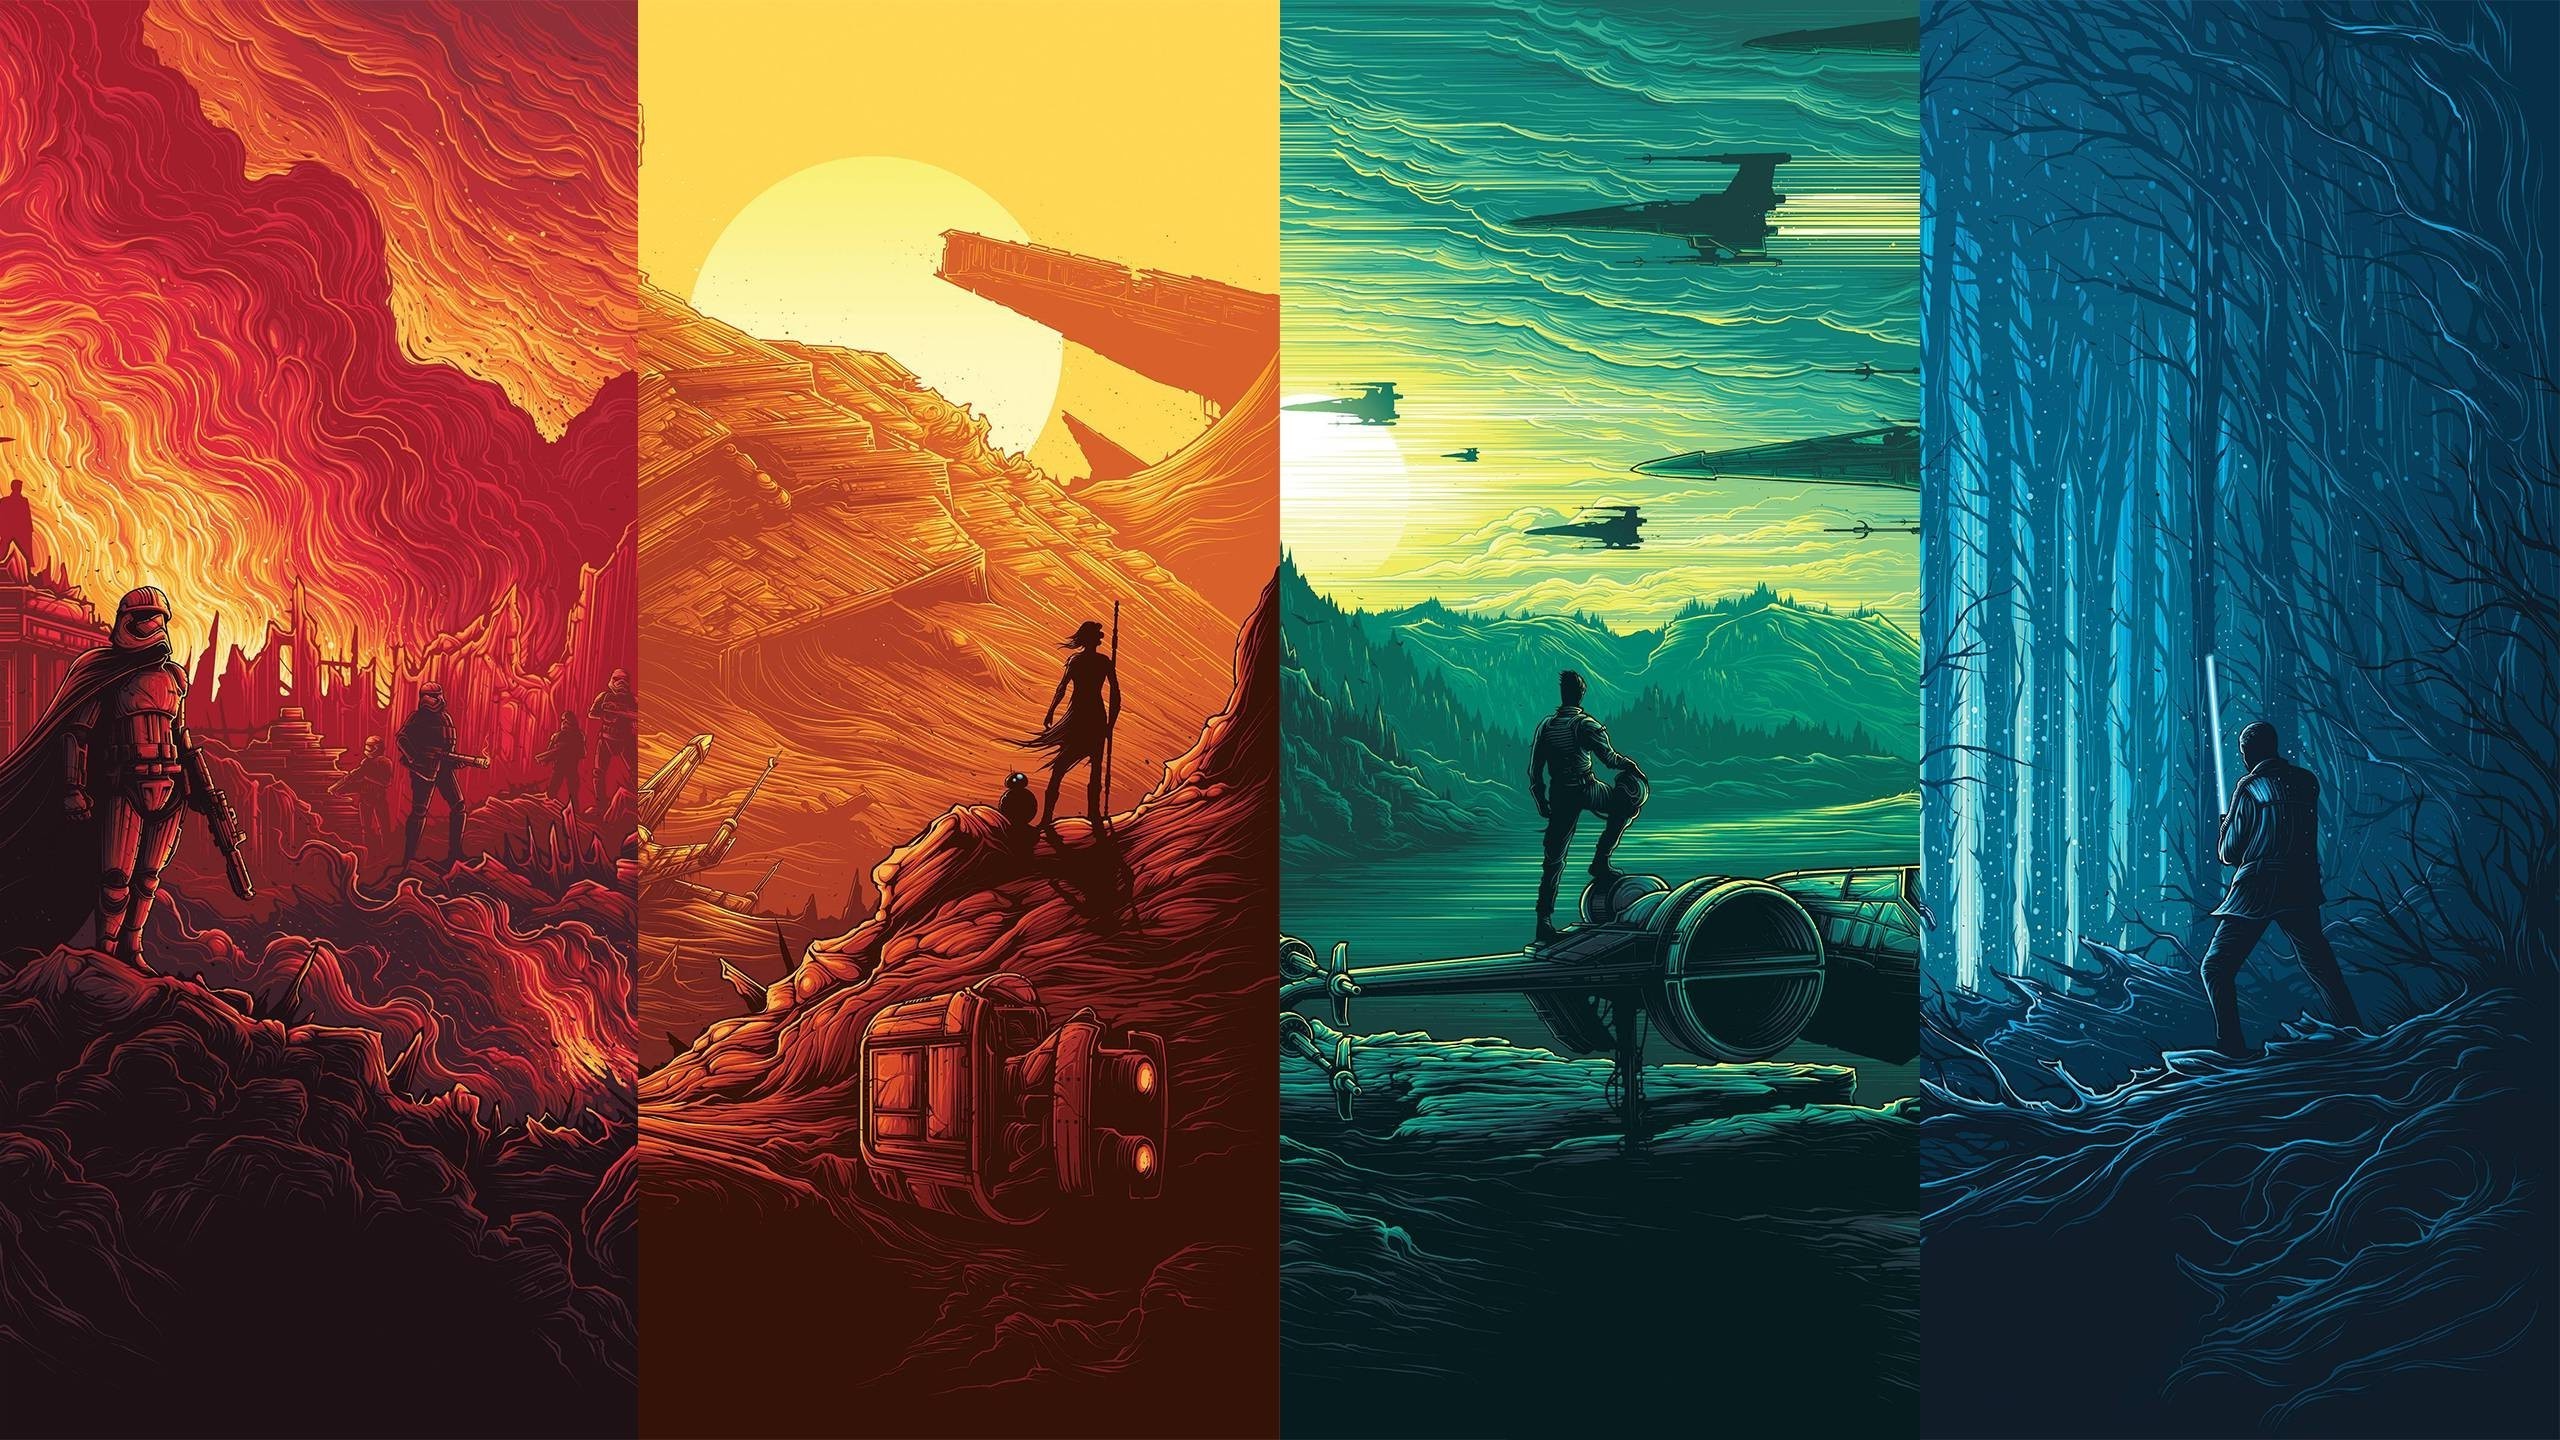 Star Wars Episode VII The Force Awakens, Collage Wallpapers HD / Desktop and Mobile Backgrounds